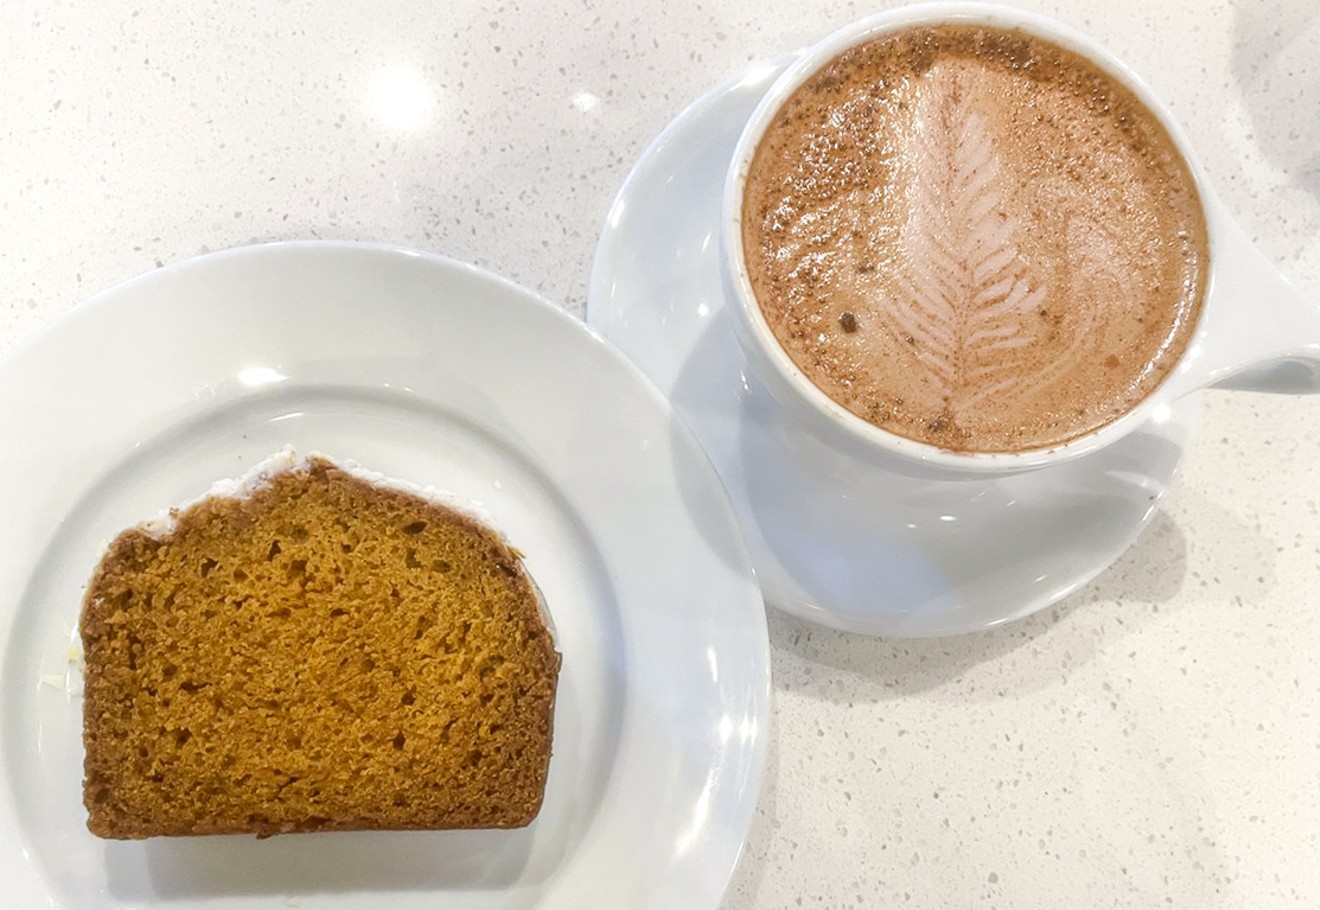 A spiced mocha and pumpkin loaf from